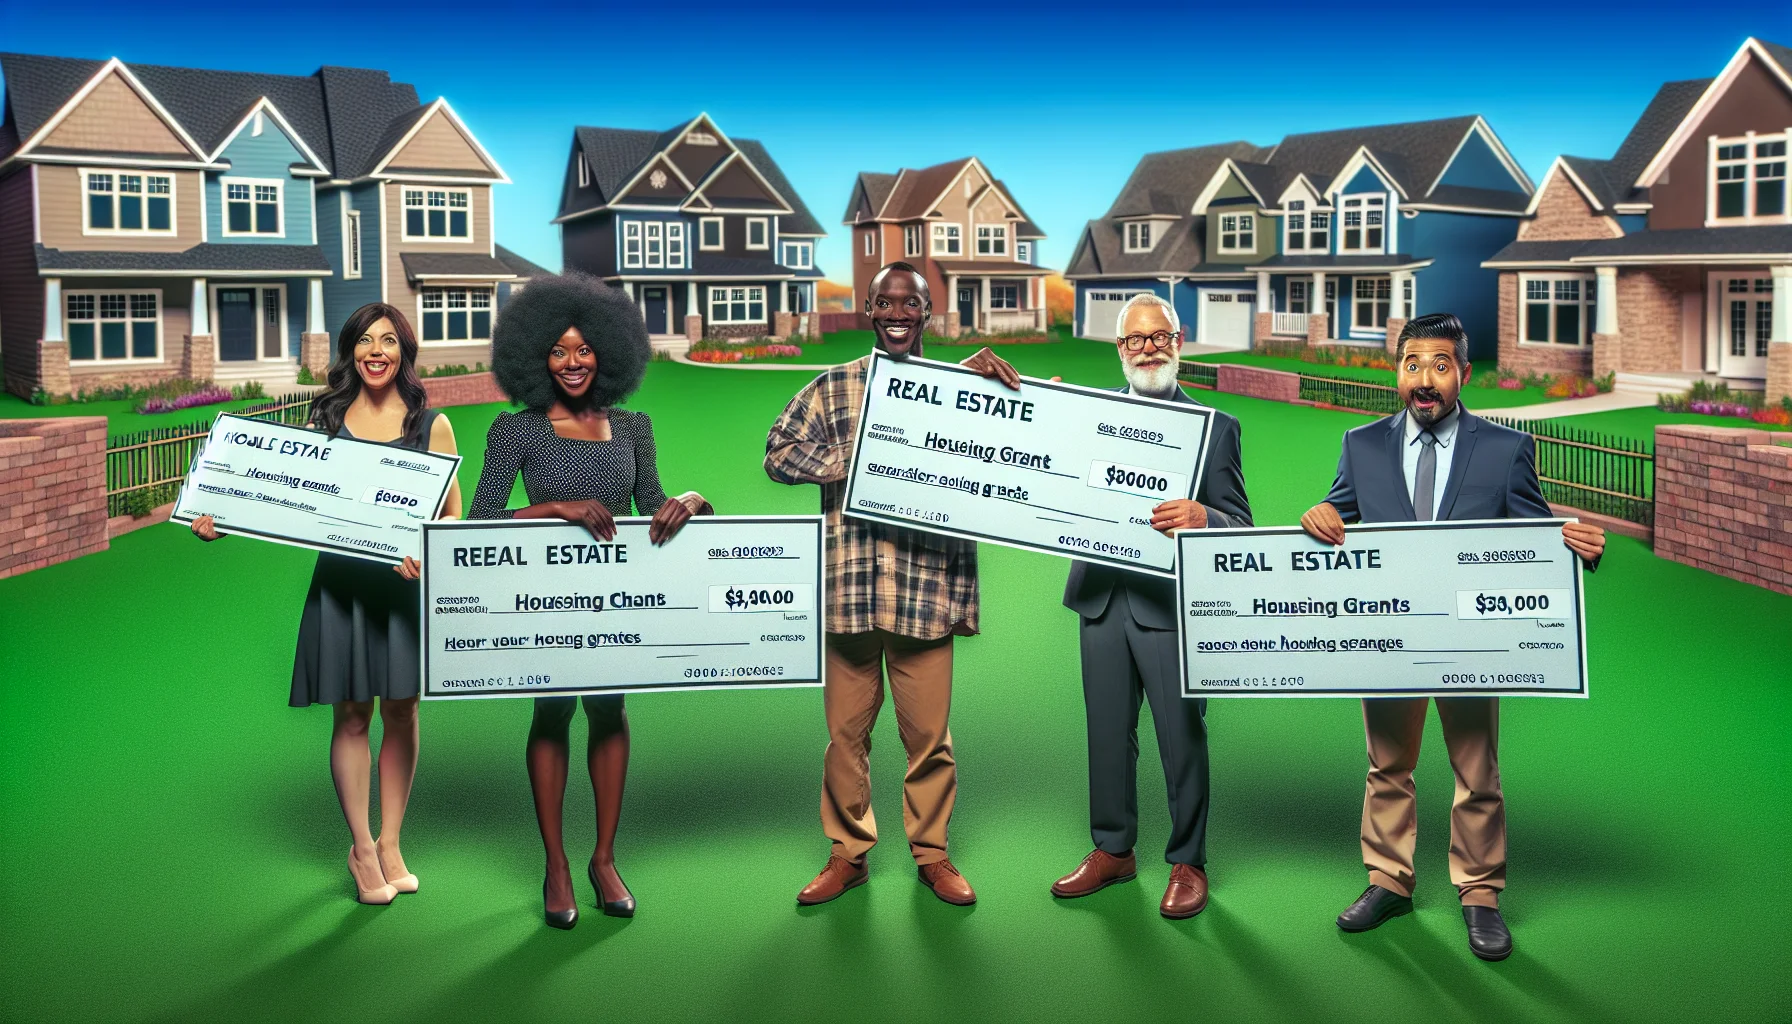 Visualize an amusing and hyper-realistic scenario where individuals secure their dream of homeownership in an idyllic real estate context. The scene unfolds showing individuals of different descents; a Black woman, a Caucasian man and a South Asian man holding oversized novelty cheques - signifying housing grants - with gleeful expressions. The backdrop is an array of beautifully constructed homes in diverse architectural styles nestled in a perfect suburban landscape under a clear blue sky, demonstrating the pinnacle of real estate splendor.